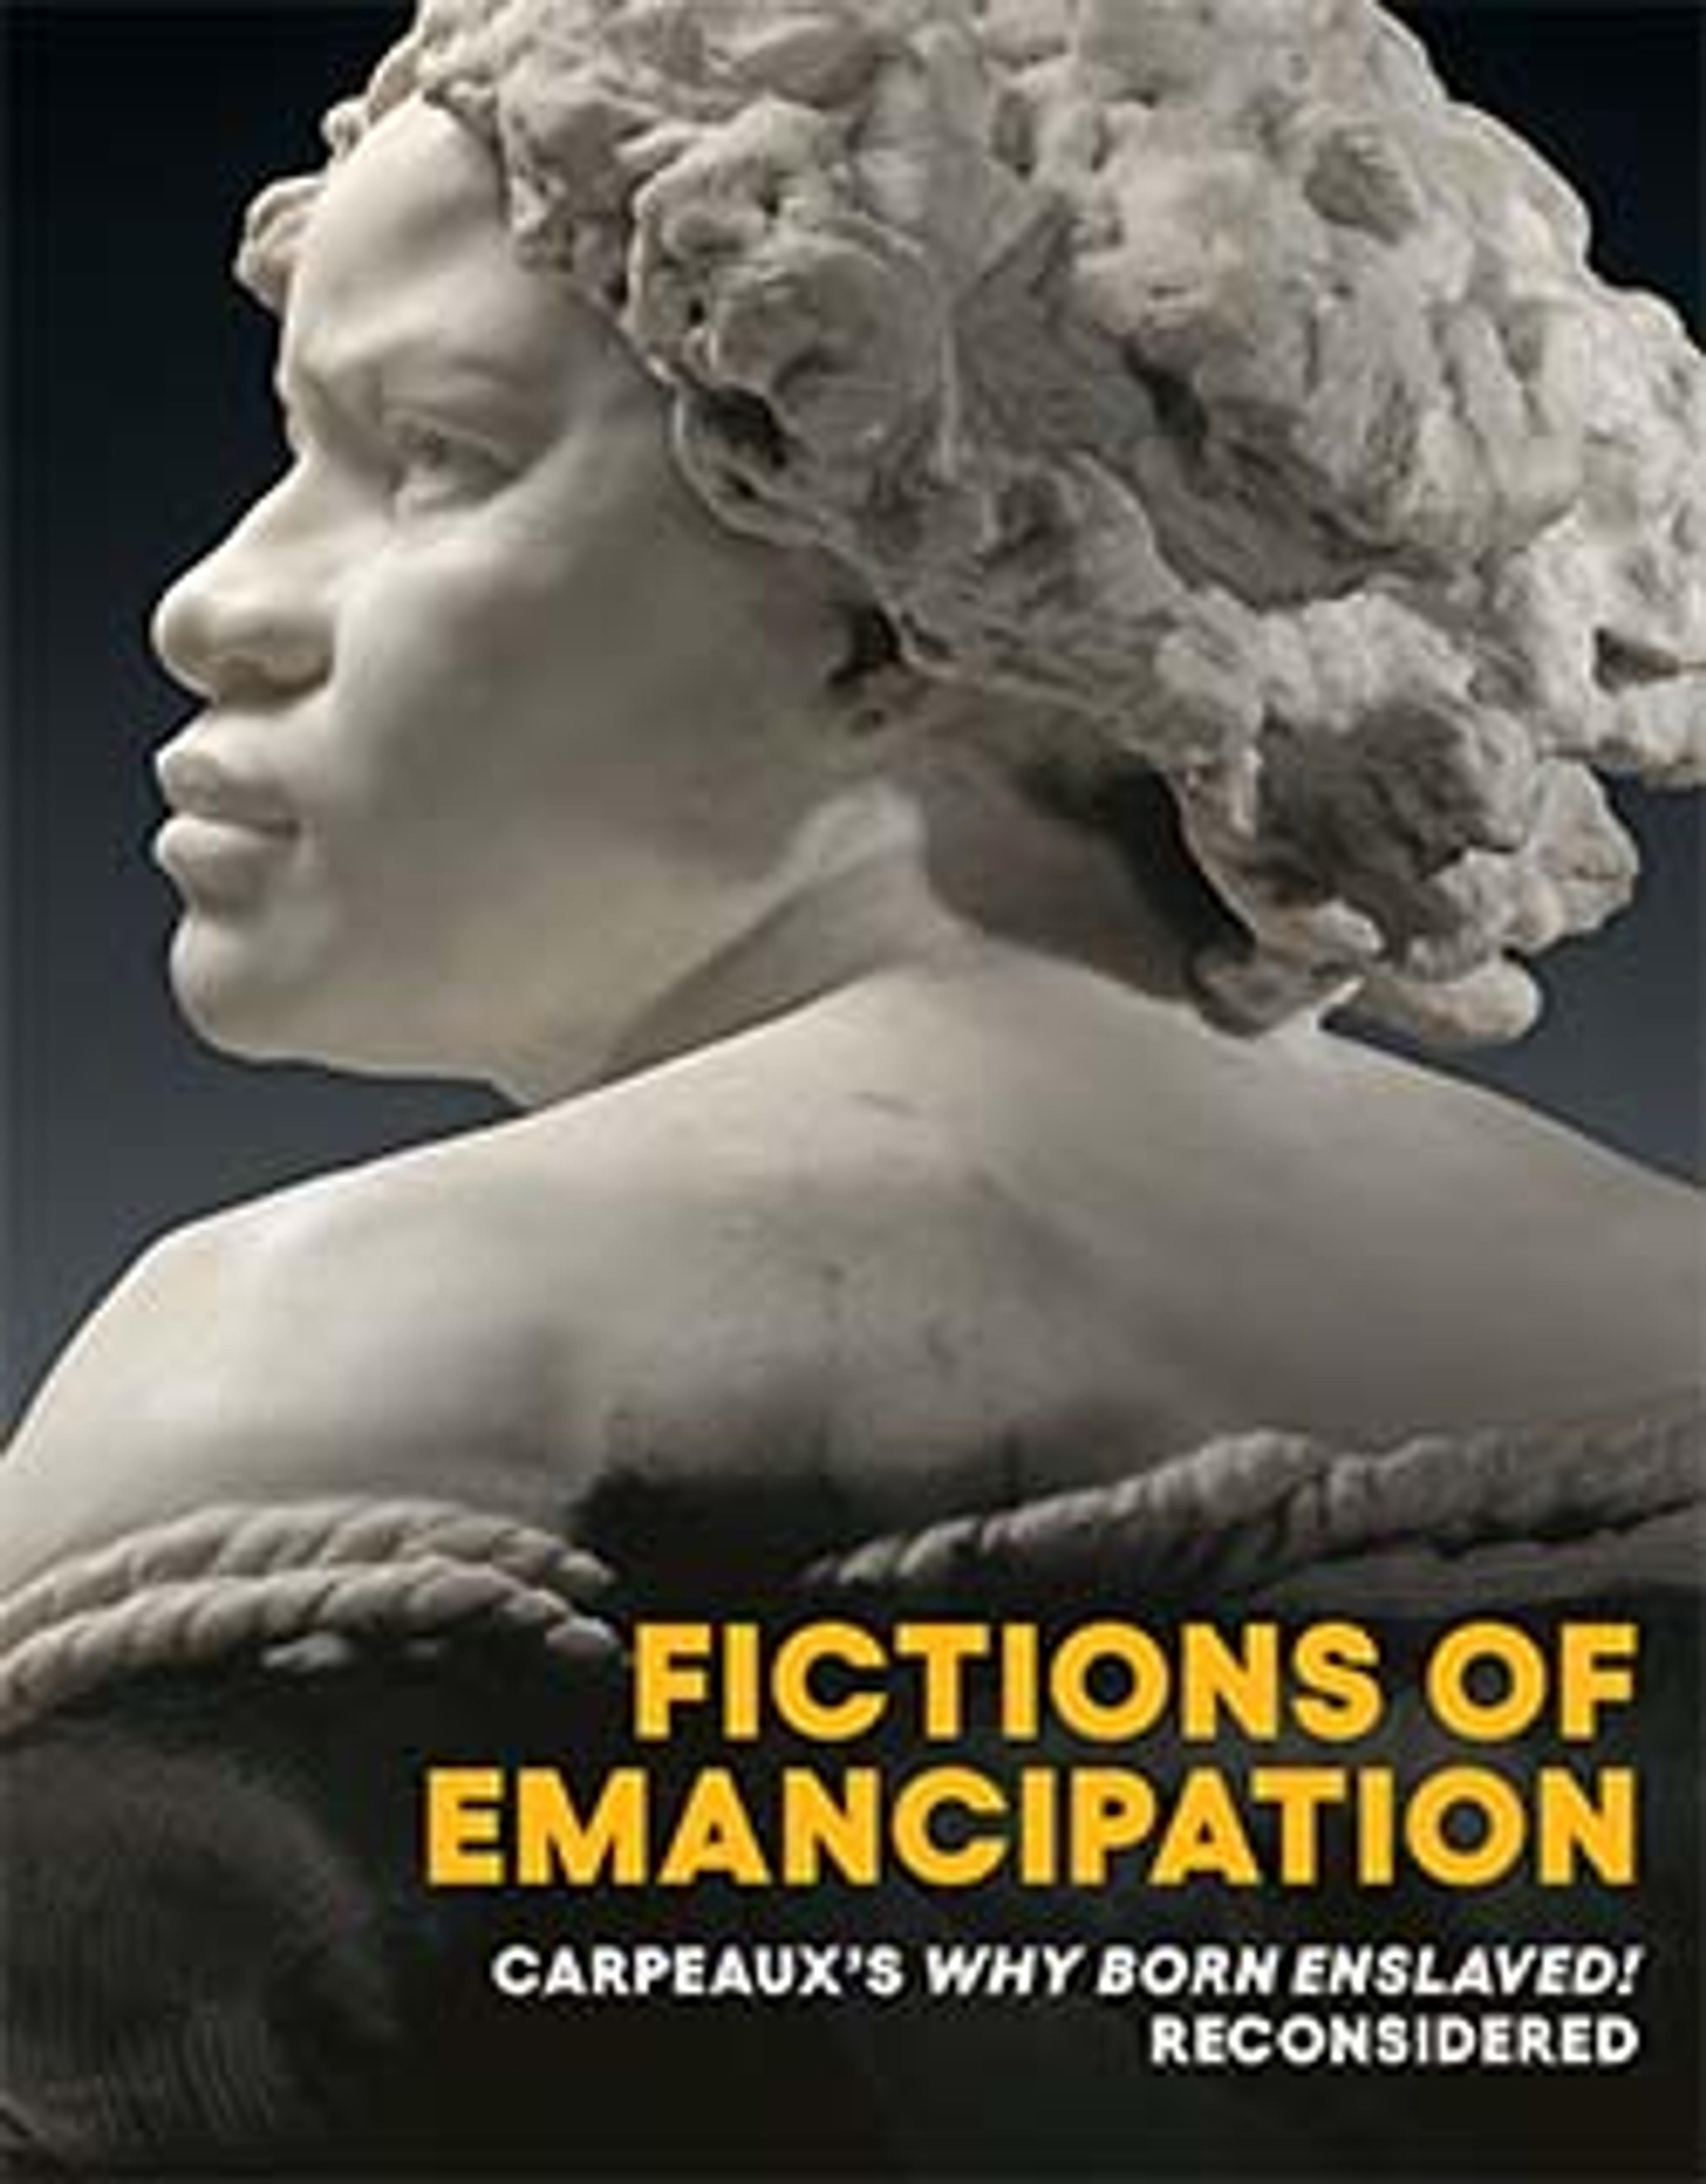 the head and upper torso of a Black woman, facing left, ropes across her back, sculpted in marble, with the title of this publication below